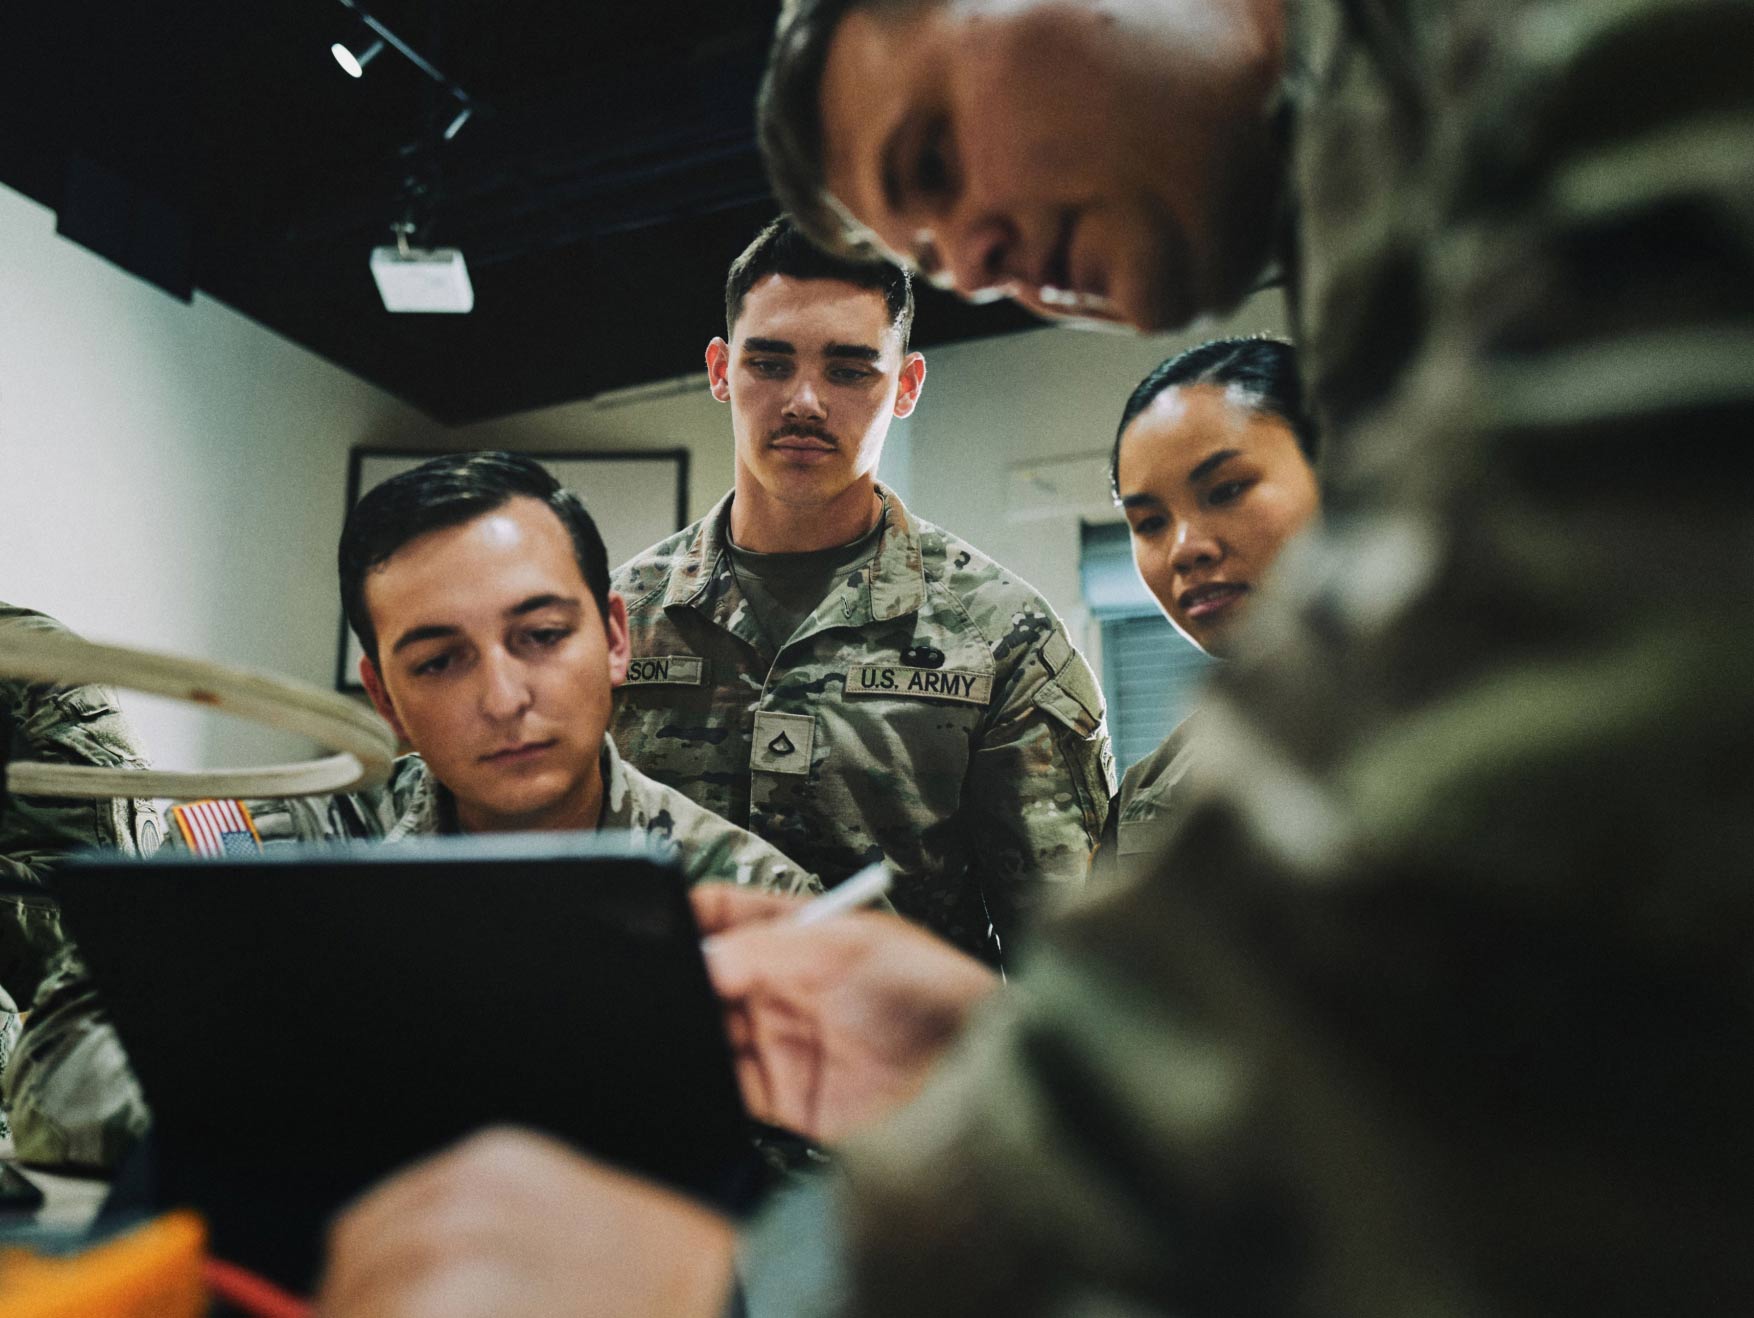 A group of Soldiers in combat uniform looking at a tablet